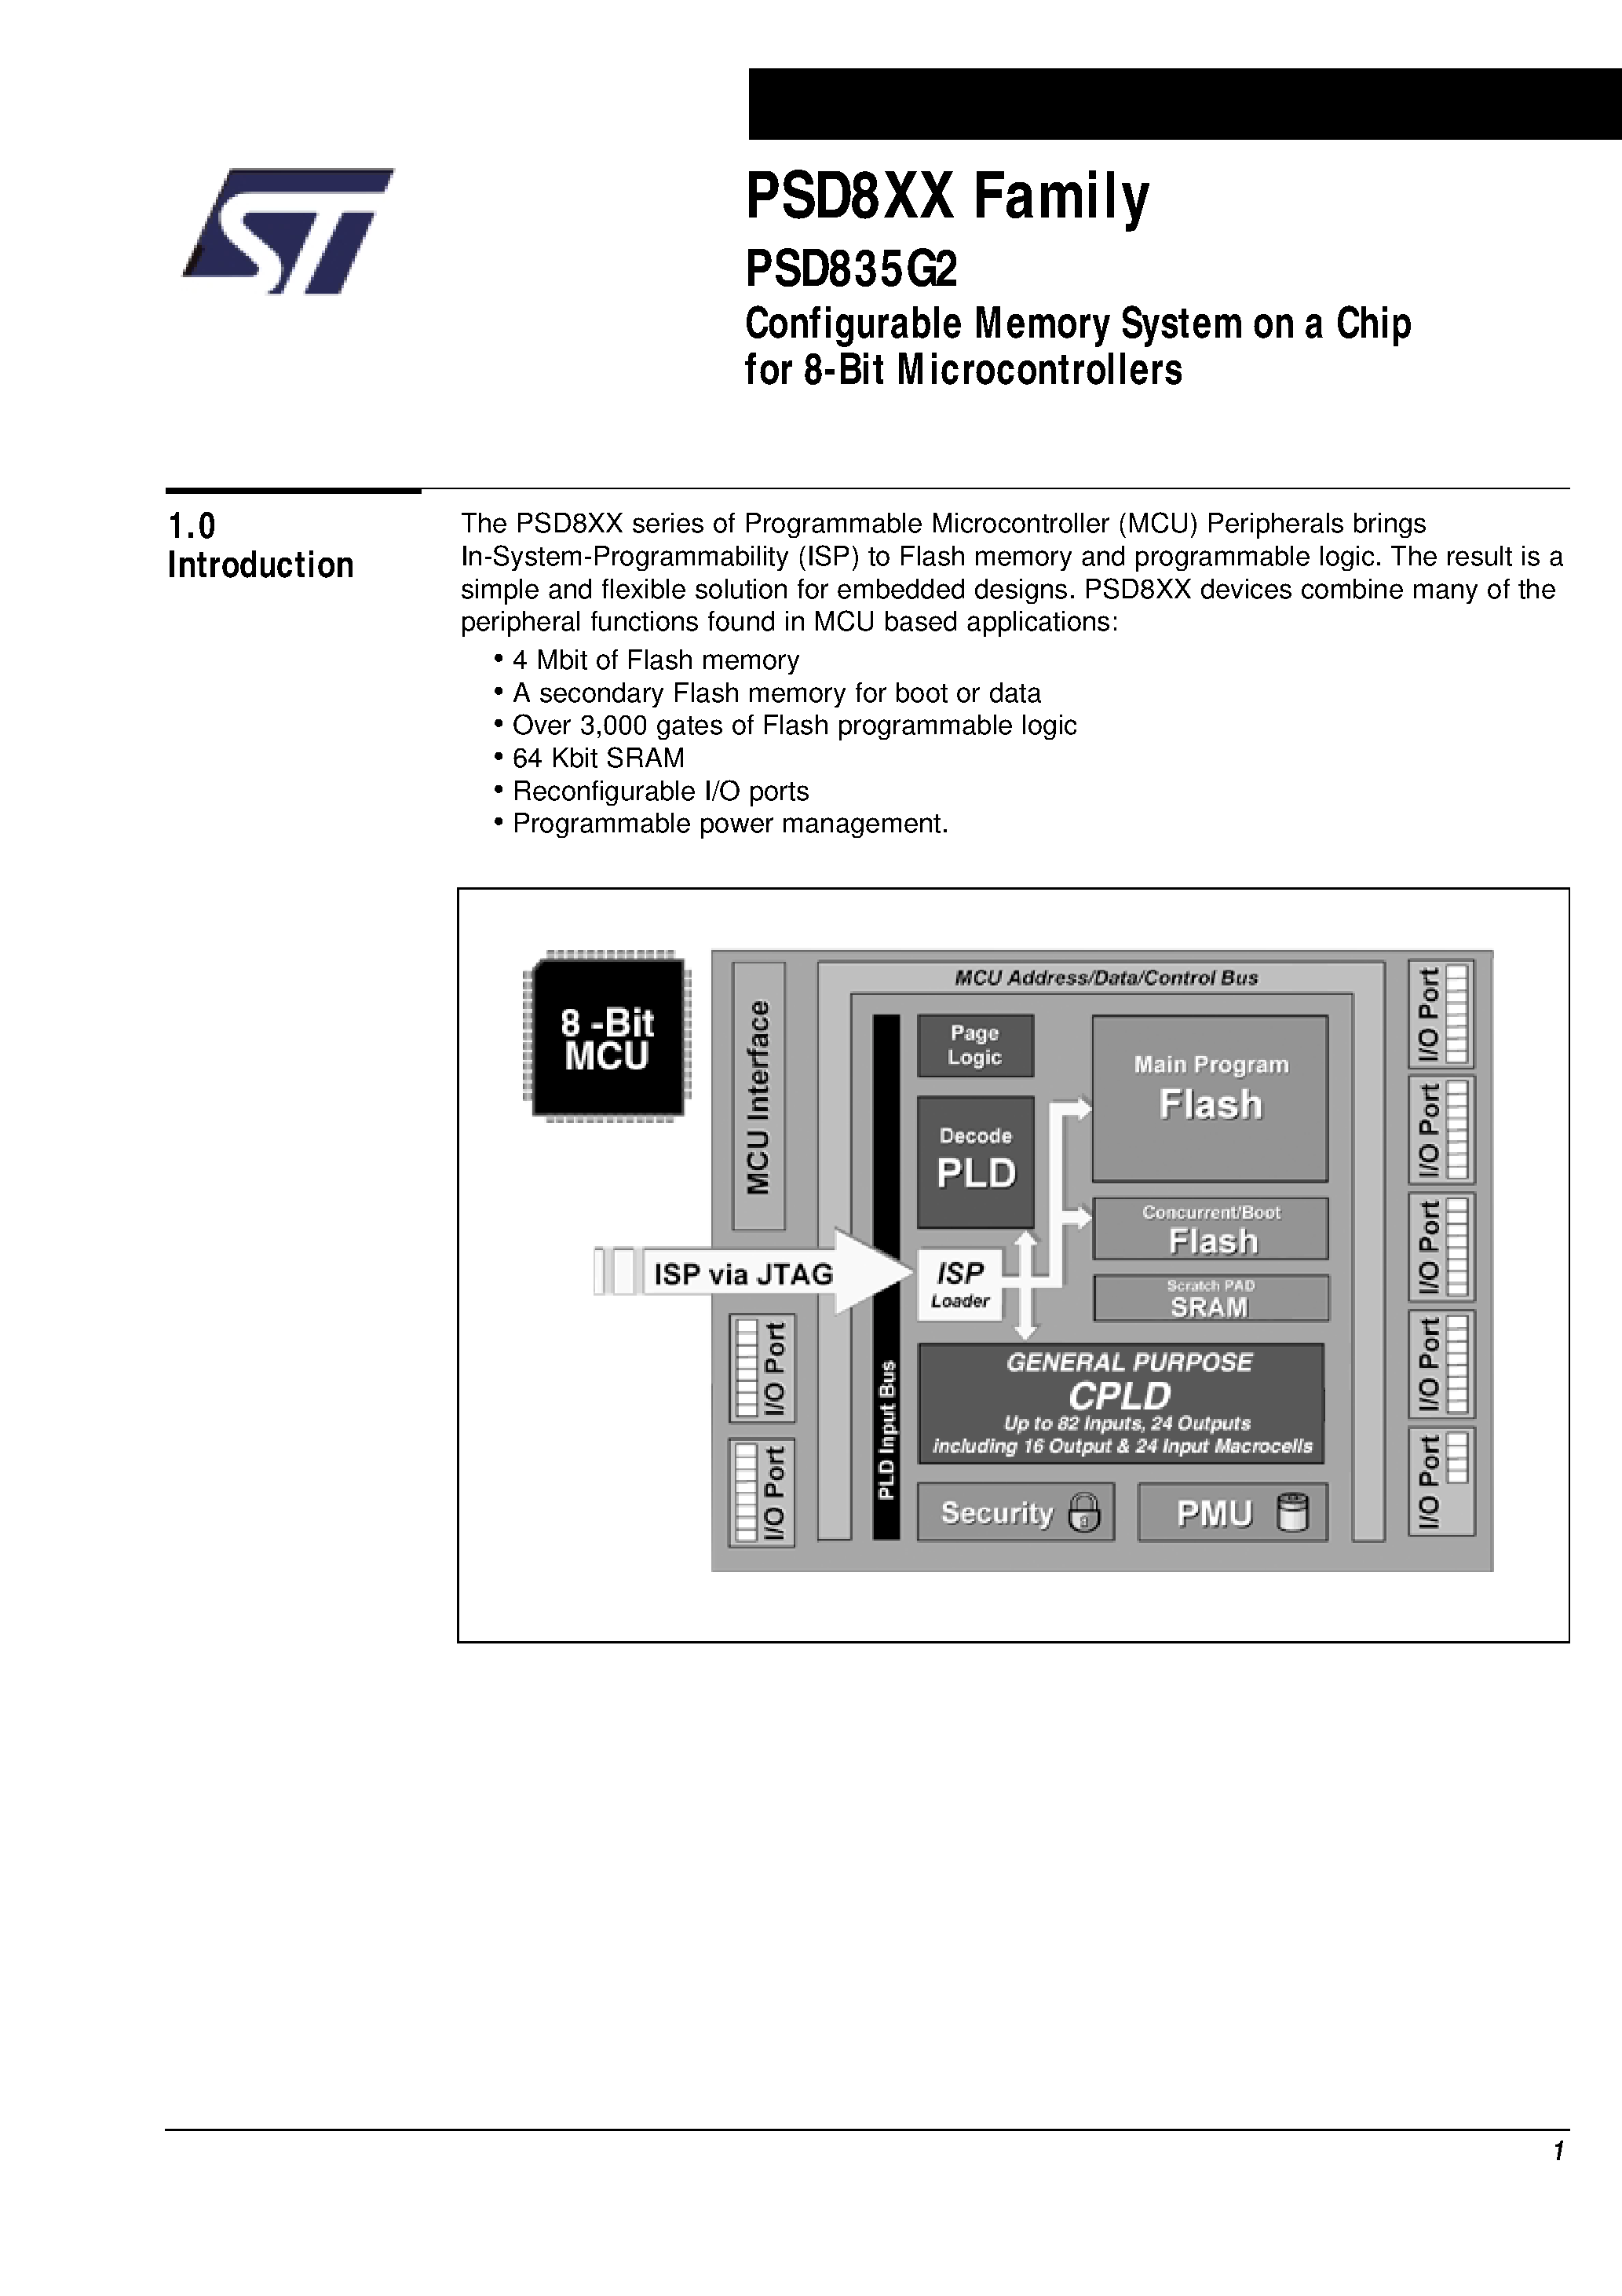 Datasheet PSD835F1-A-15B81 - Configurable Memory System on a Chip for 8-Bit Microcontrollers page 2